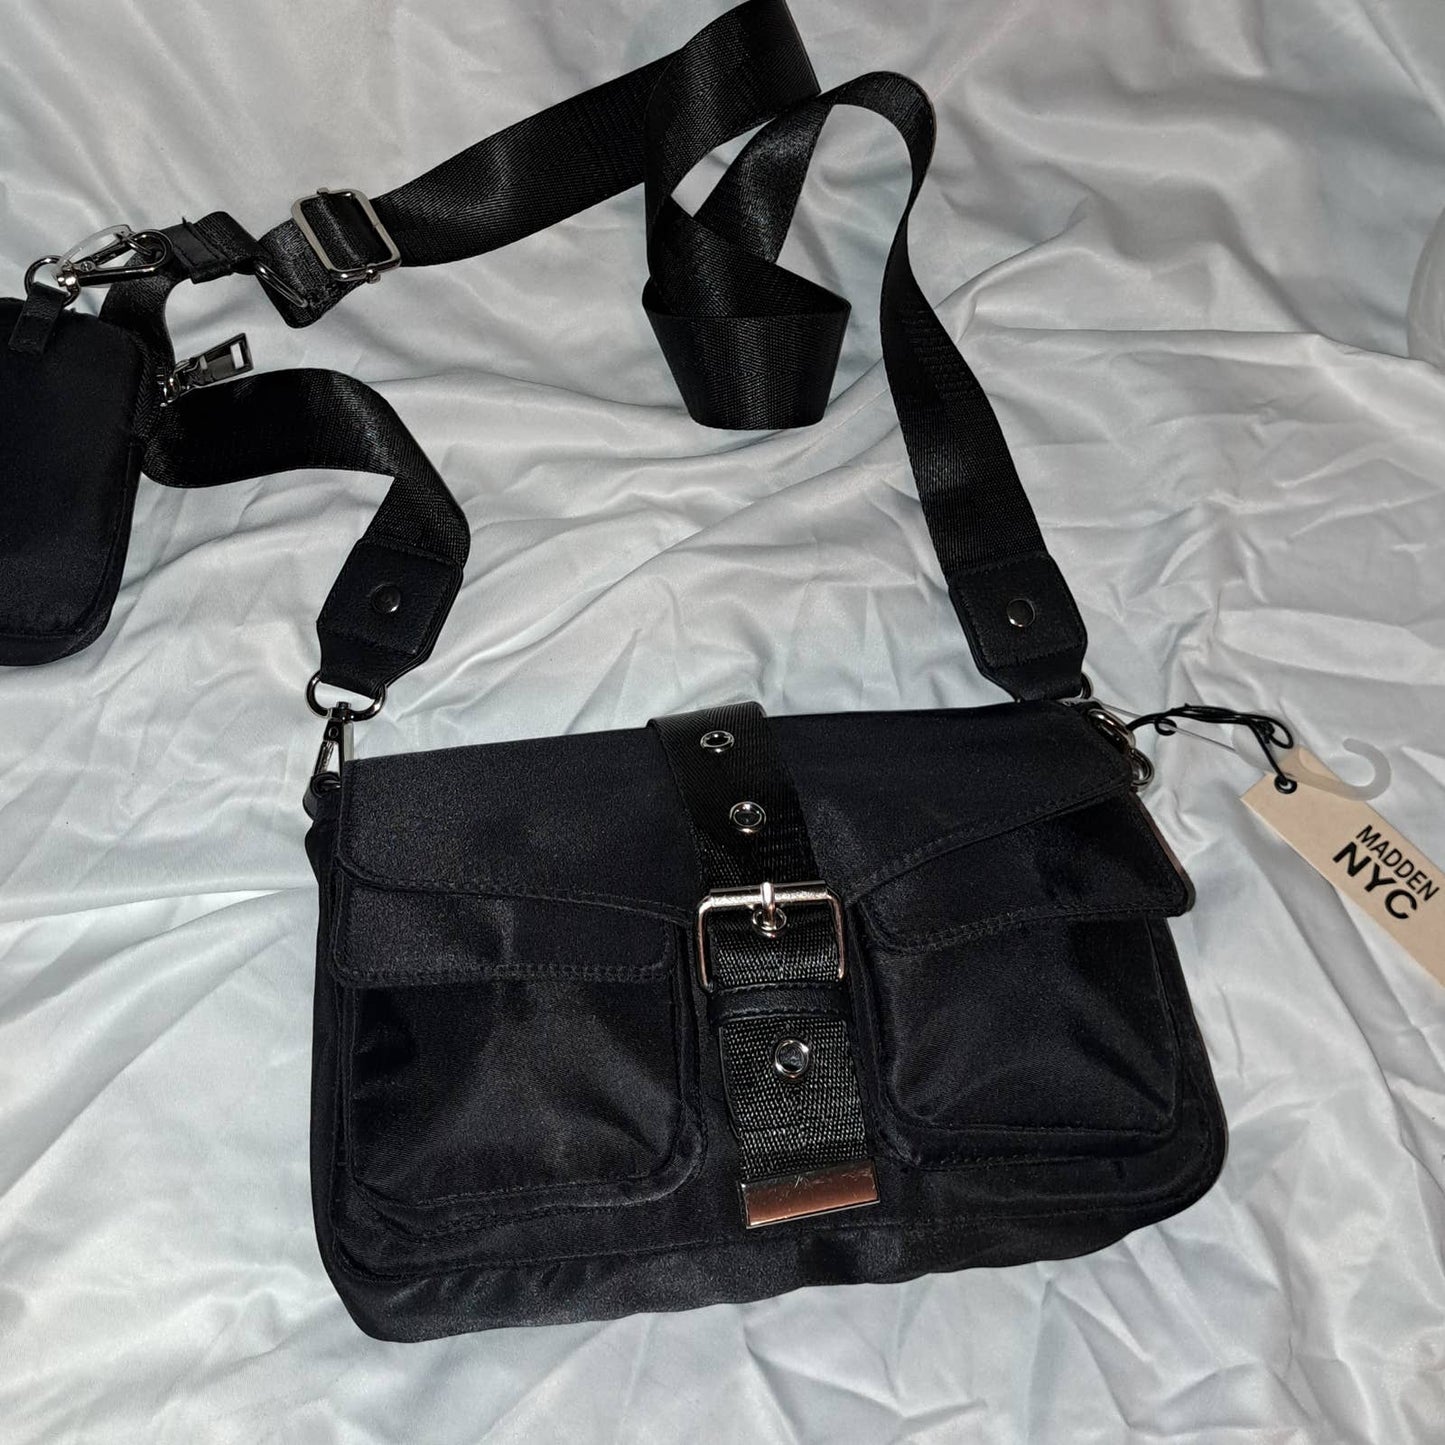 NWT Madden NYC Nylon Crossbody extra long strap and phone pouch